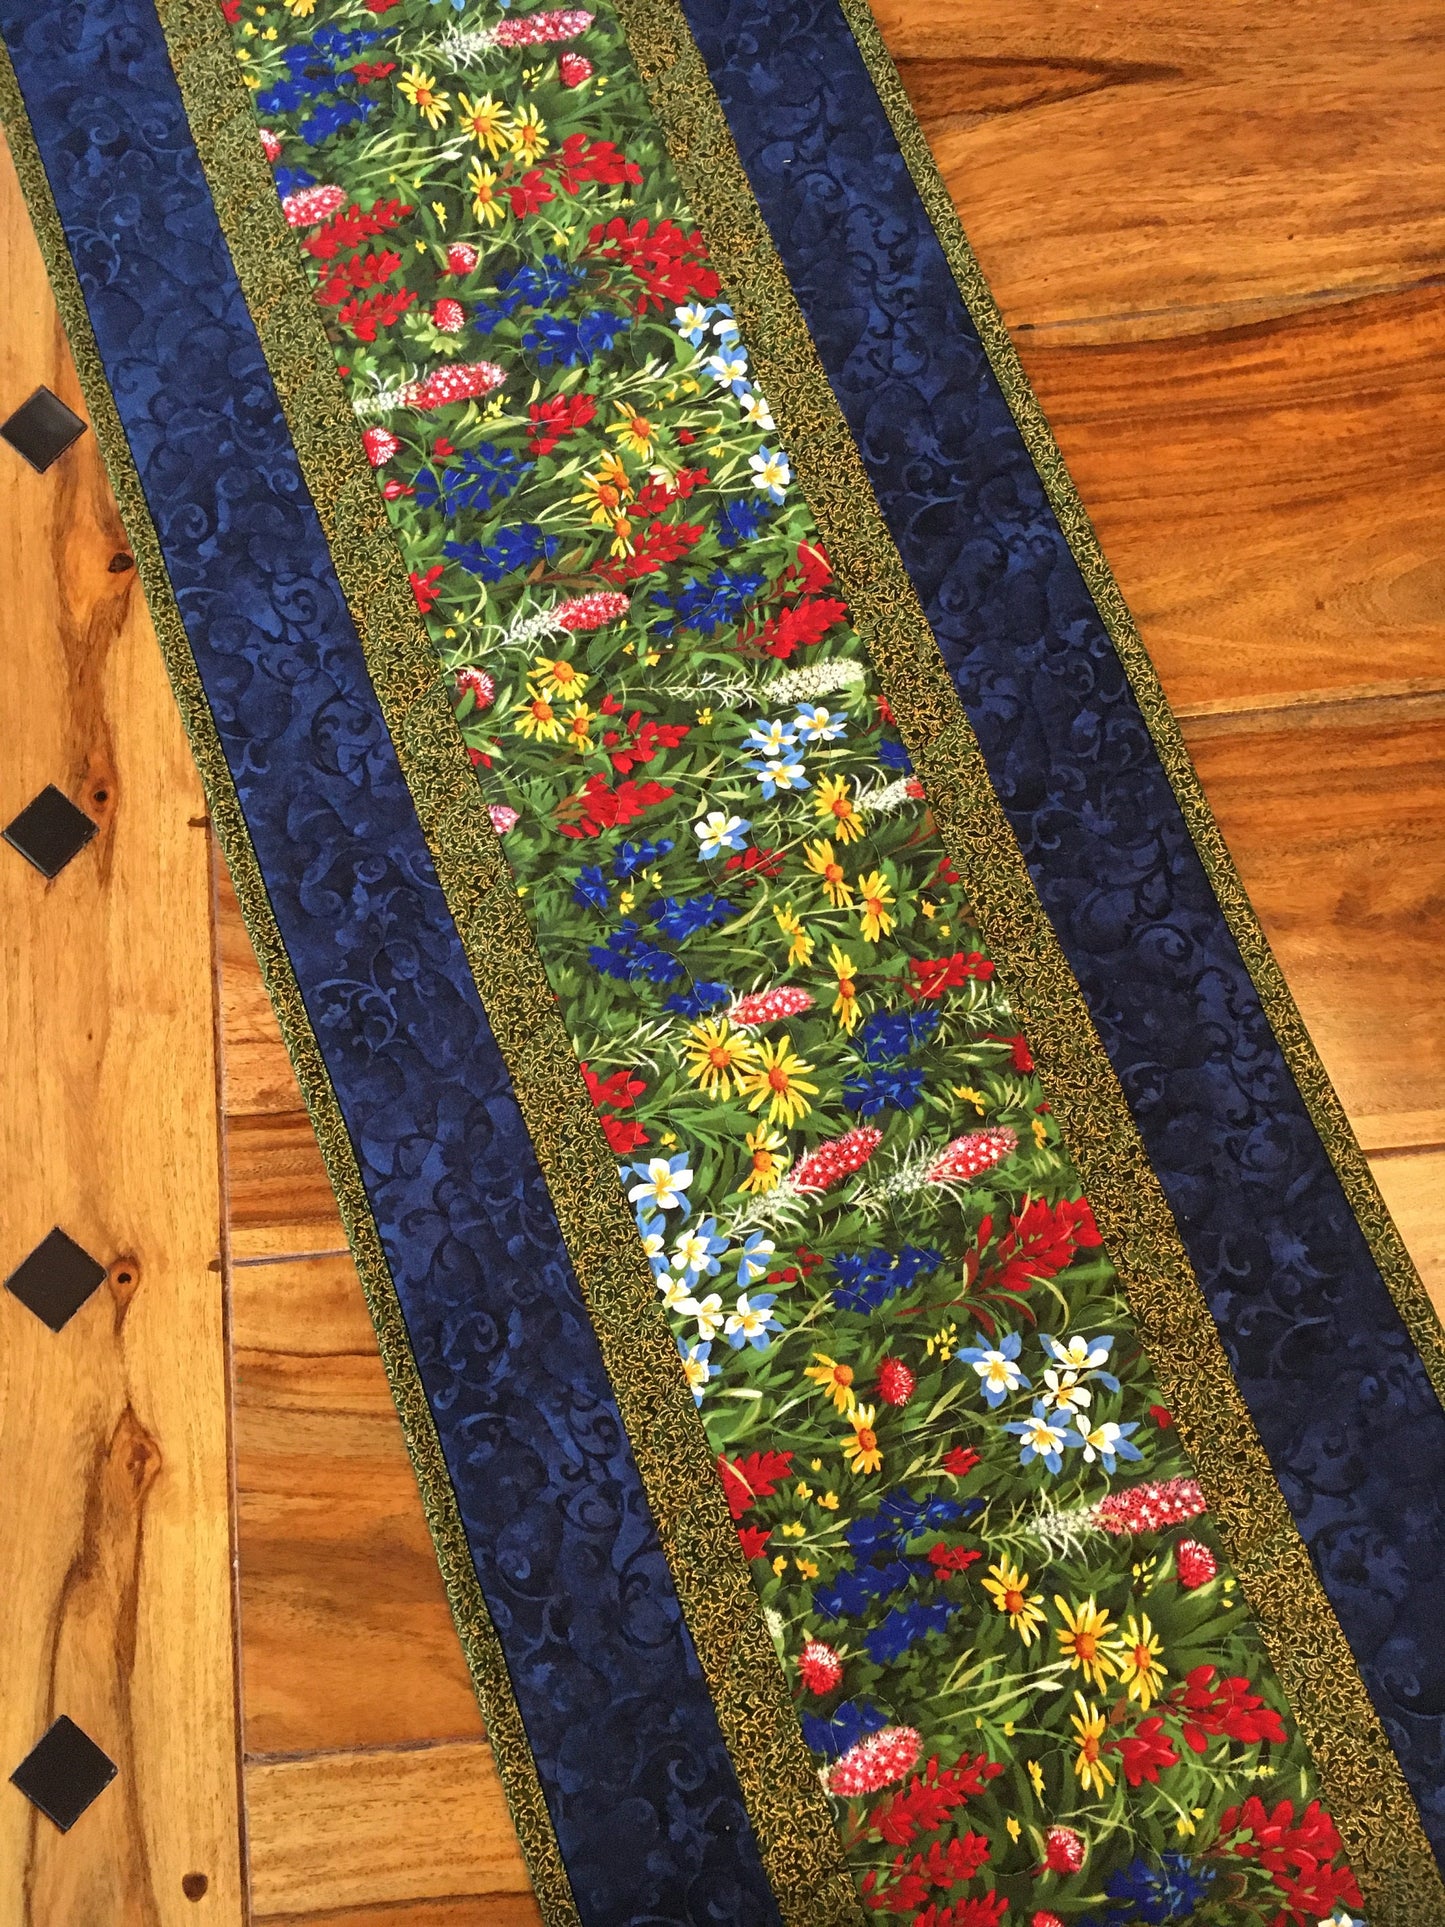 Dining Table Runner Summer Texas Wildflowers, 14x36", Yellow Red Blue Flowers, Dining Room Coffee Table Runner, Garden Floral Everyday Mats